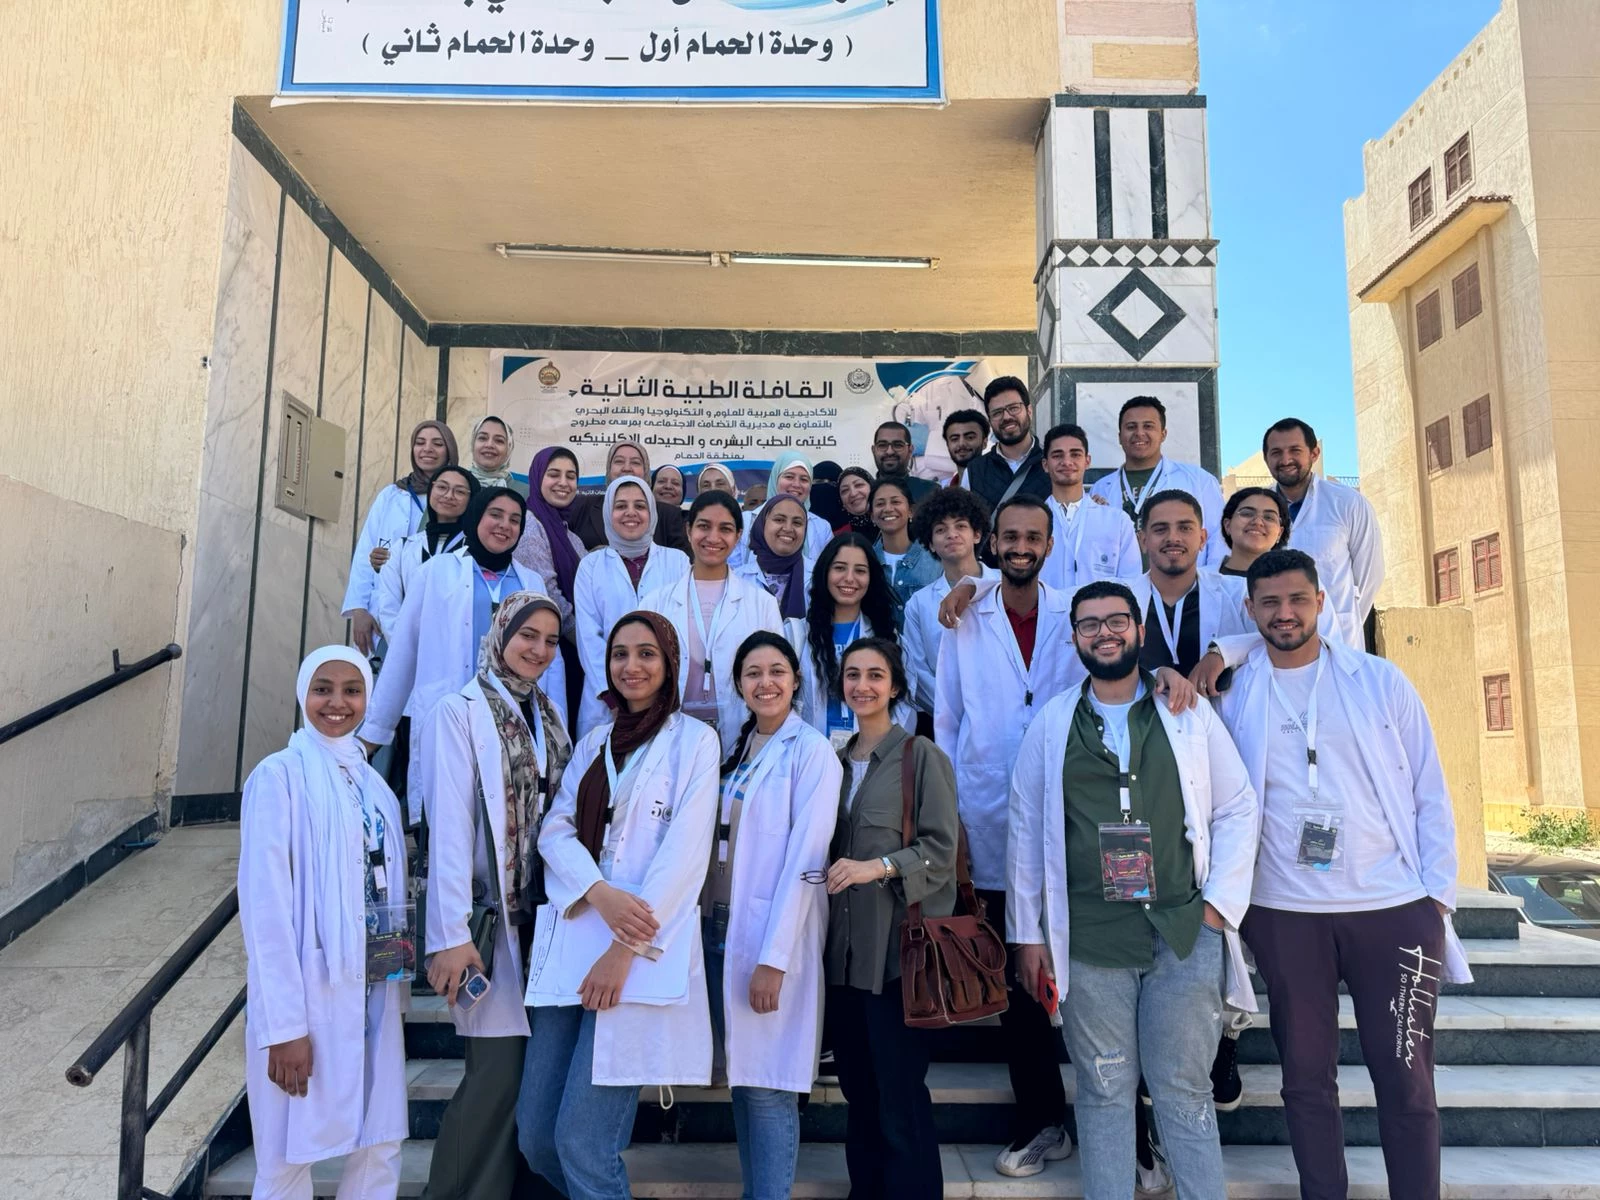 AAST College of Medicine's Second Medical Convoy Provides Services in Marsa Matrouh